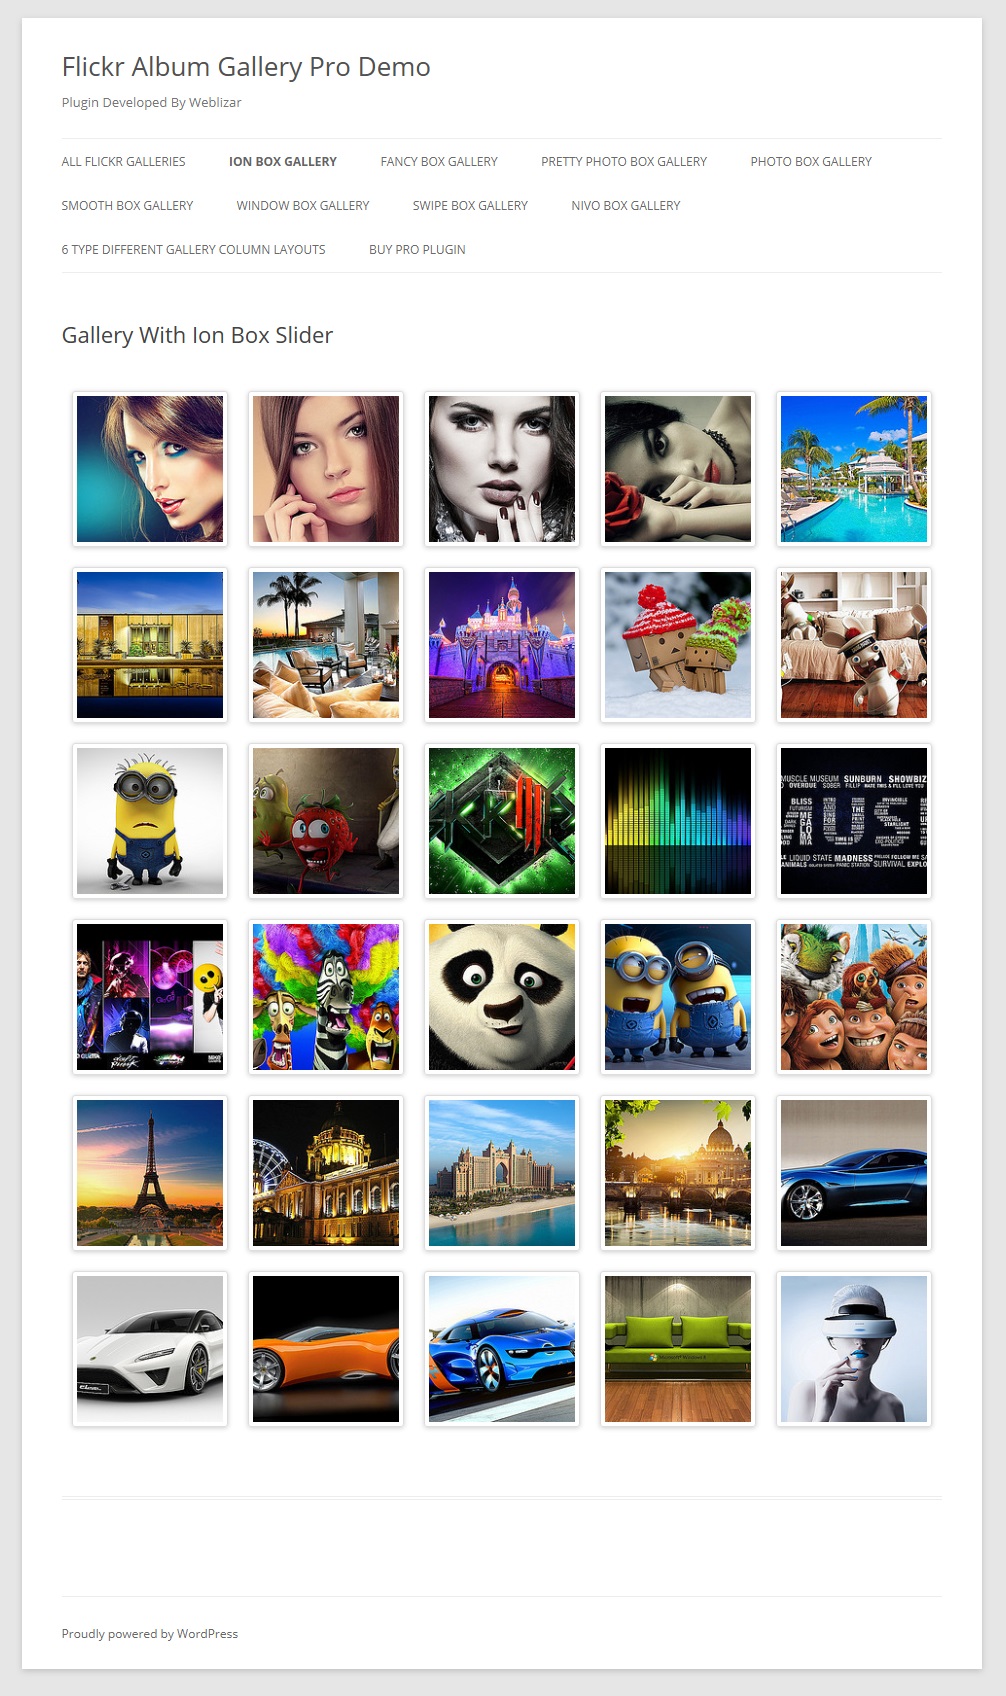 Flickr Album Gallery Preview On Page